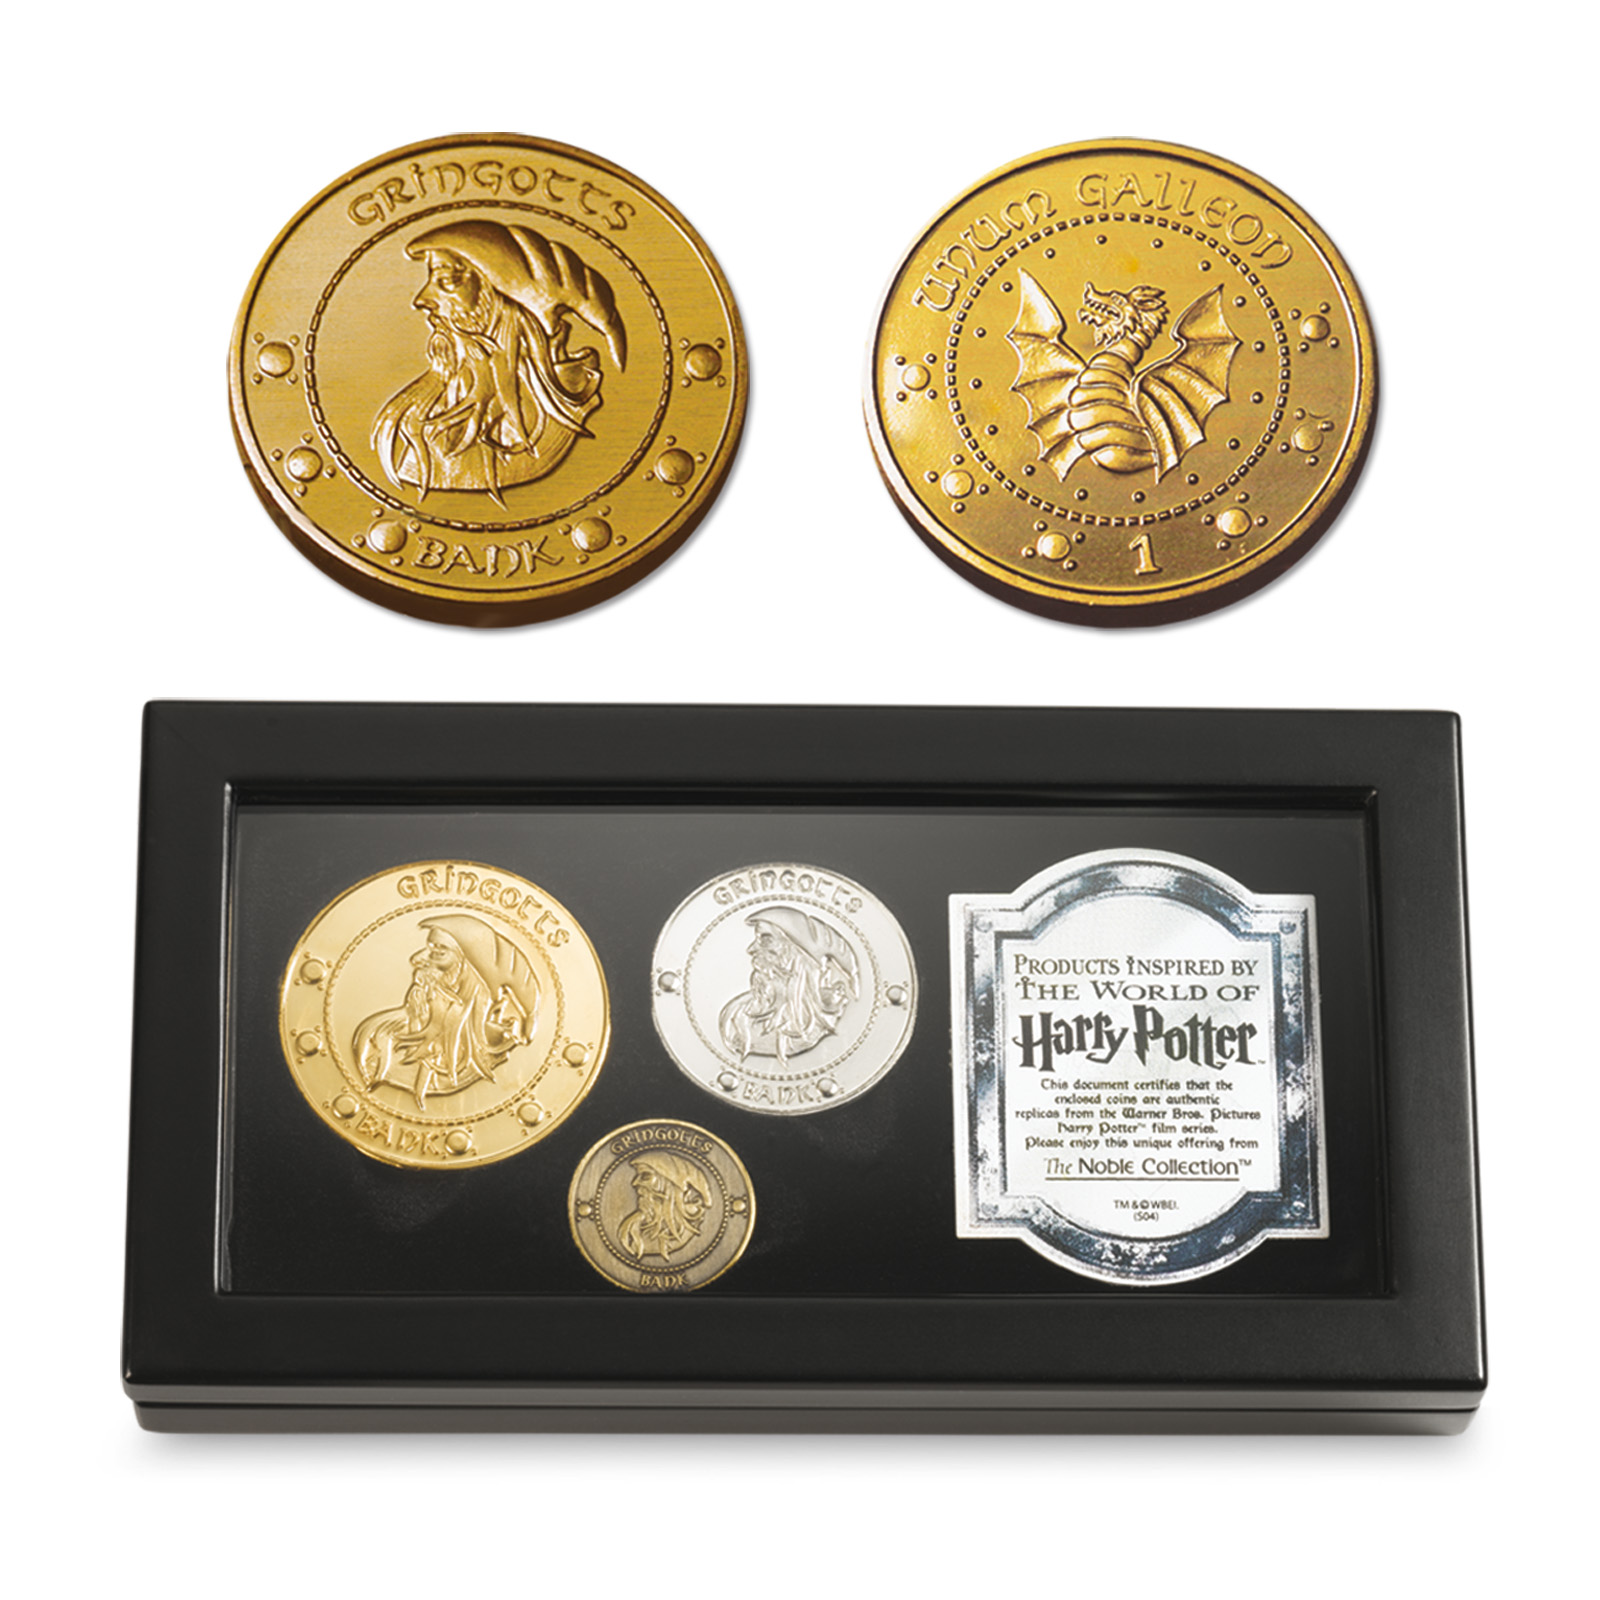 Gringotts Coin Collection